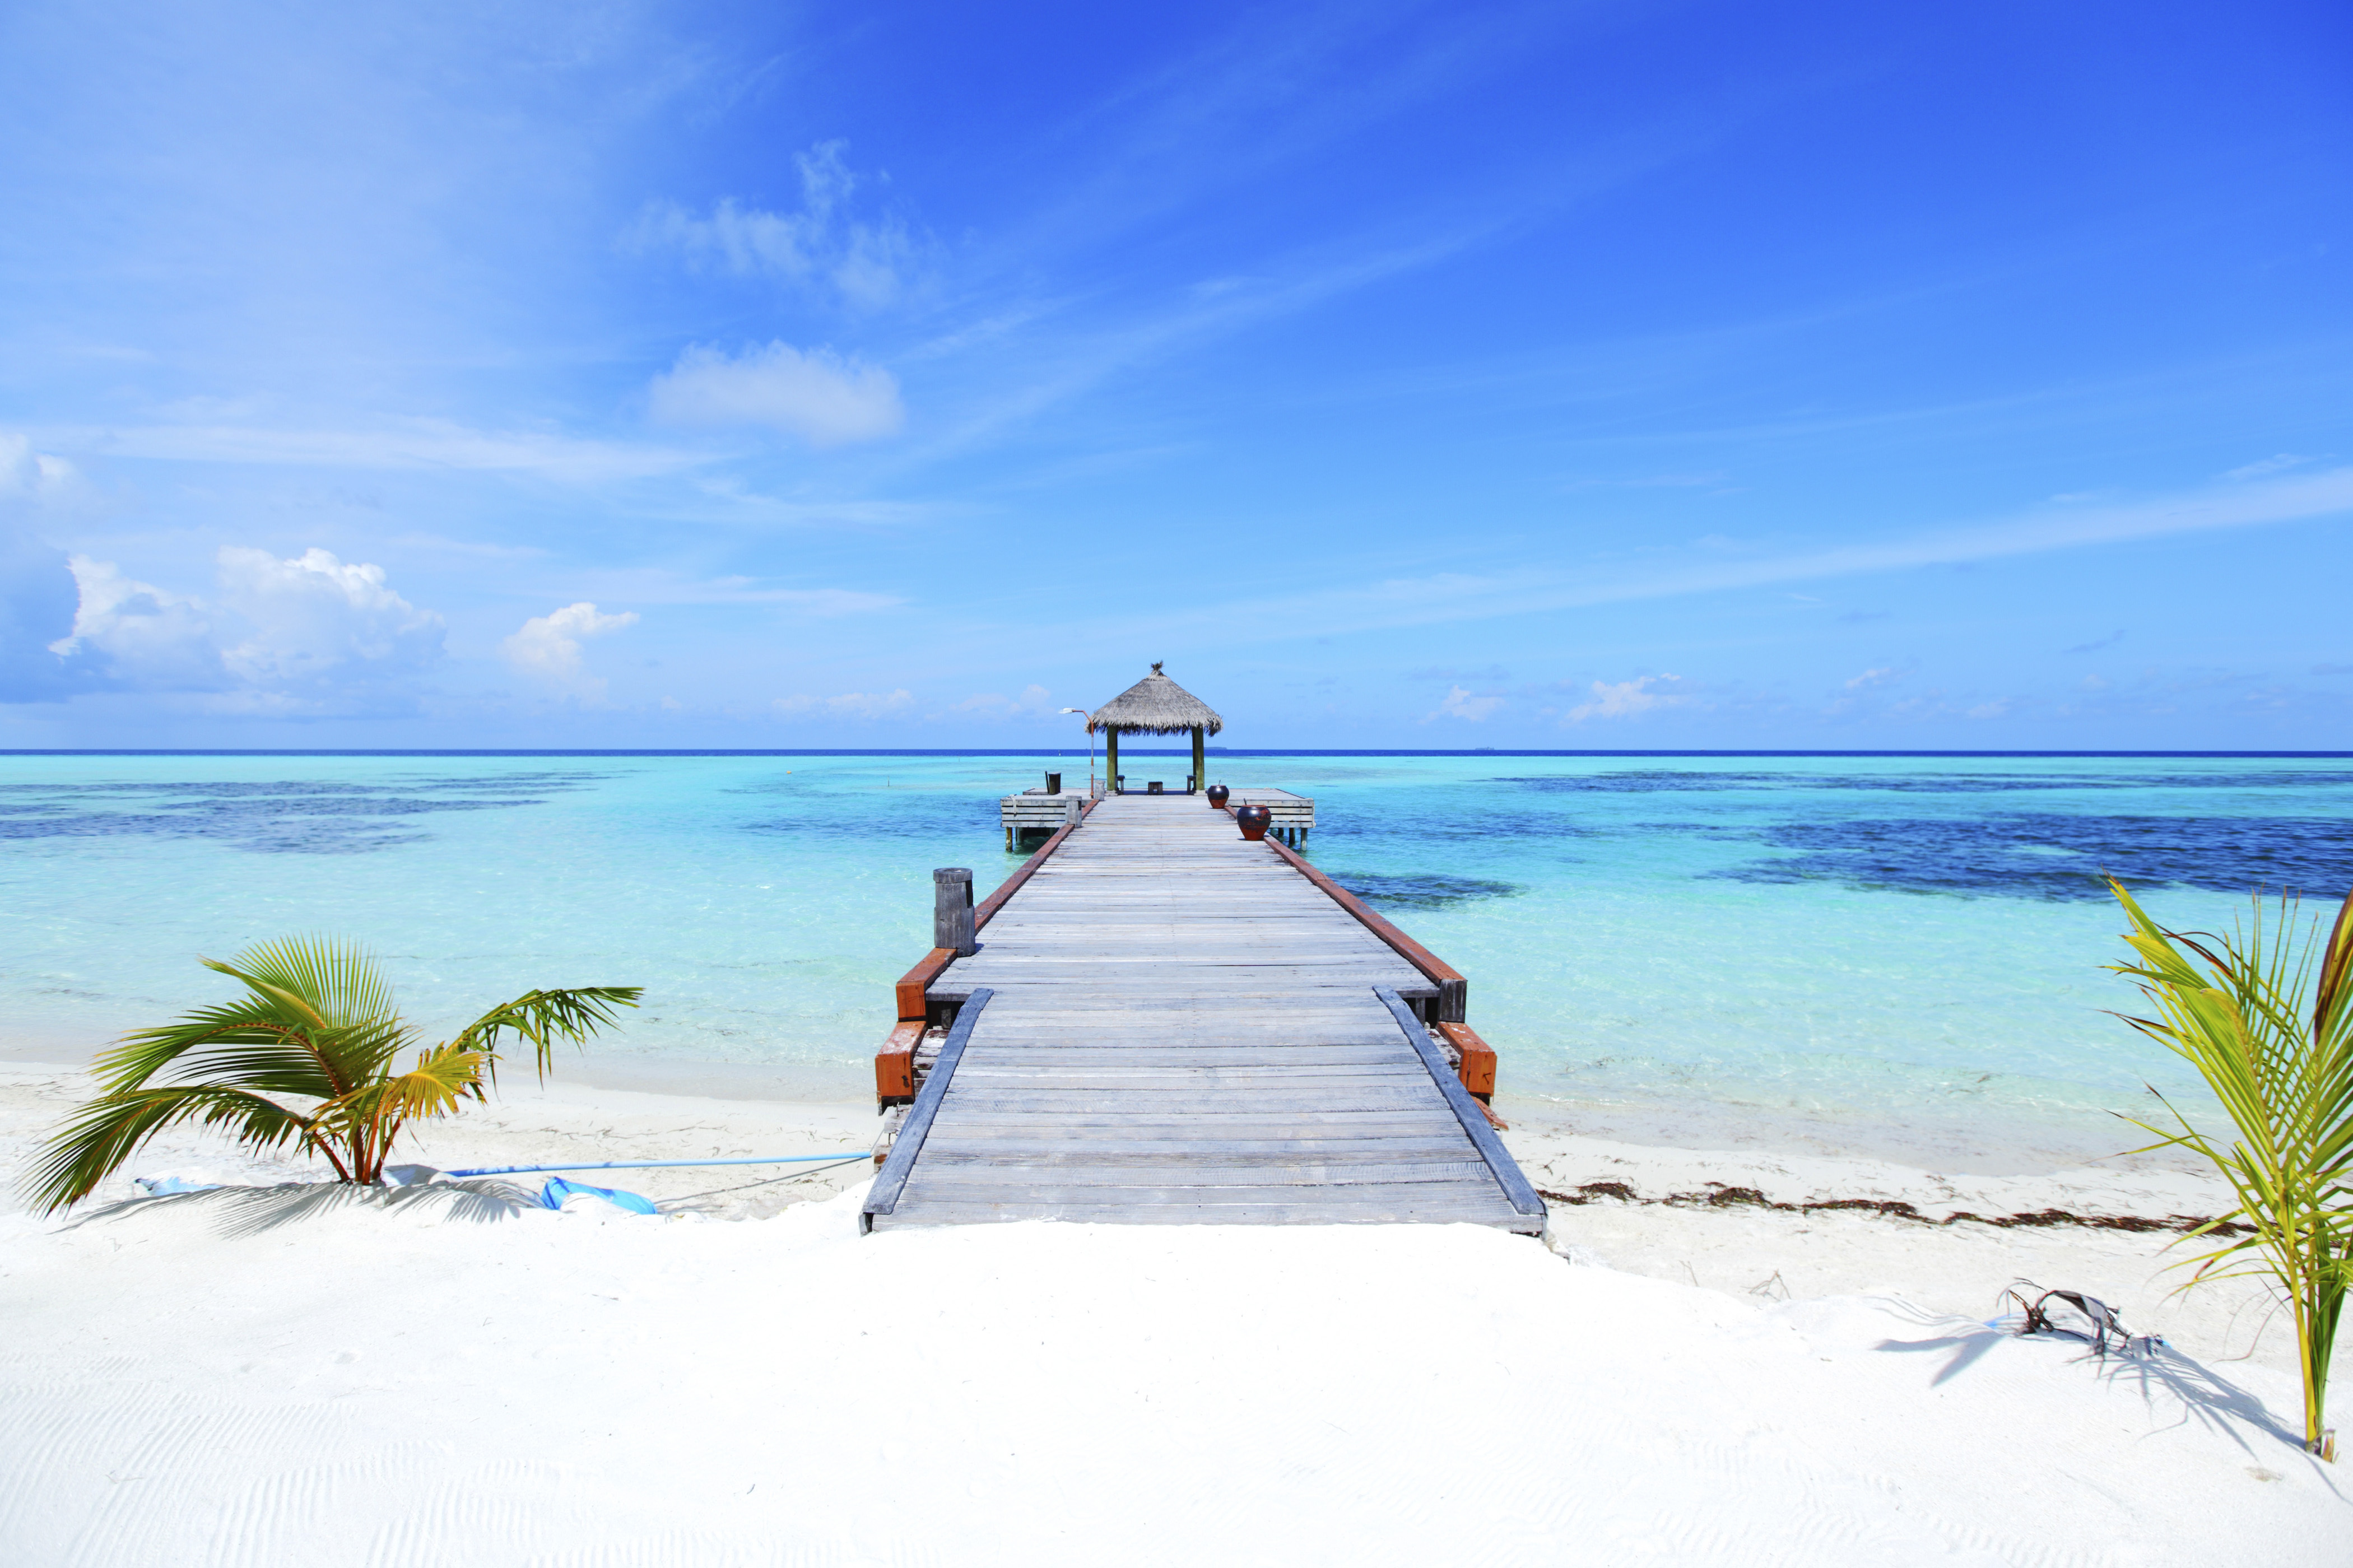 Nice Images Collection: Caribbean! Desktop Wallpapers